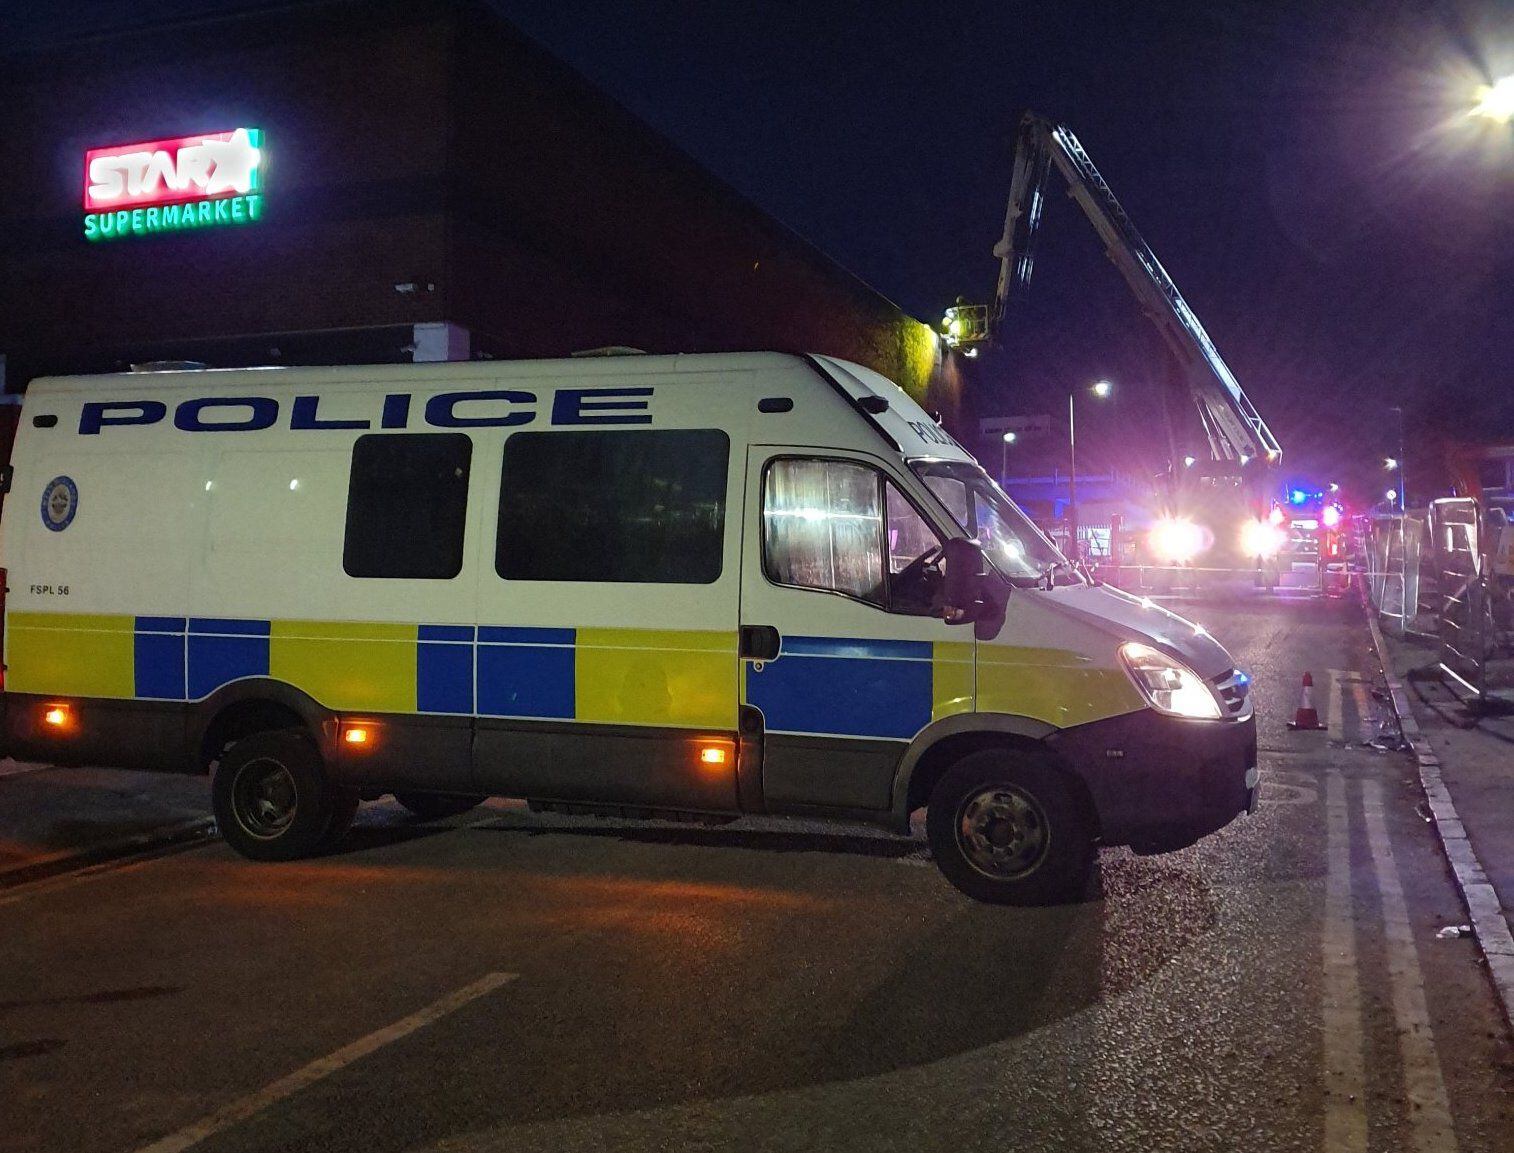 Large blaze which caused supermarket to be evacuated was started deliberately